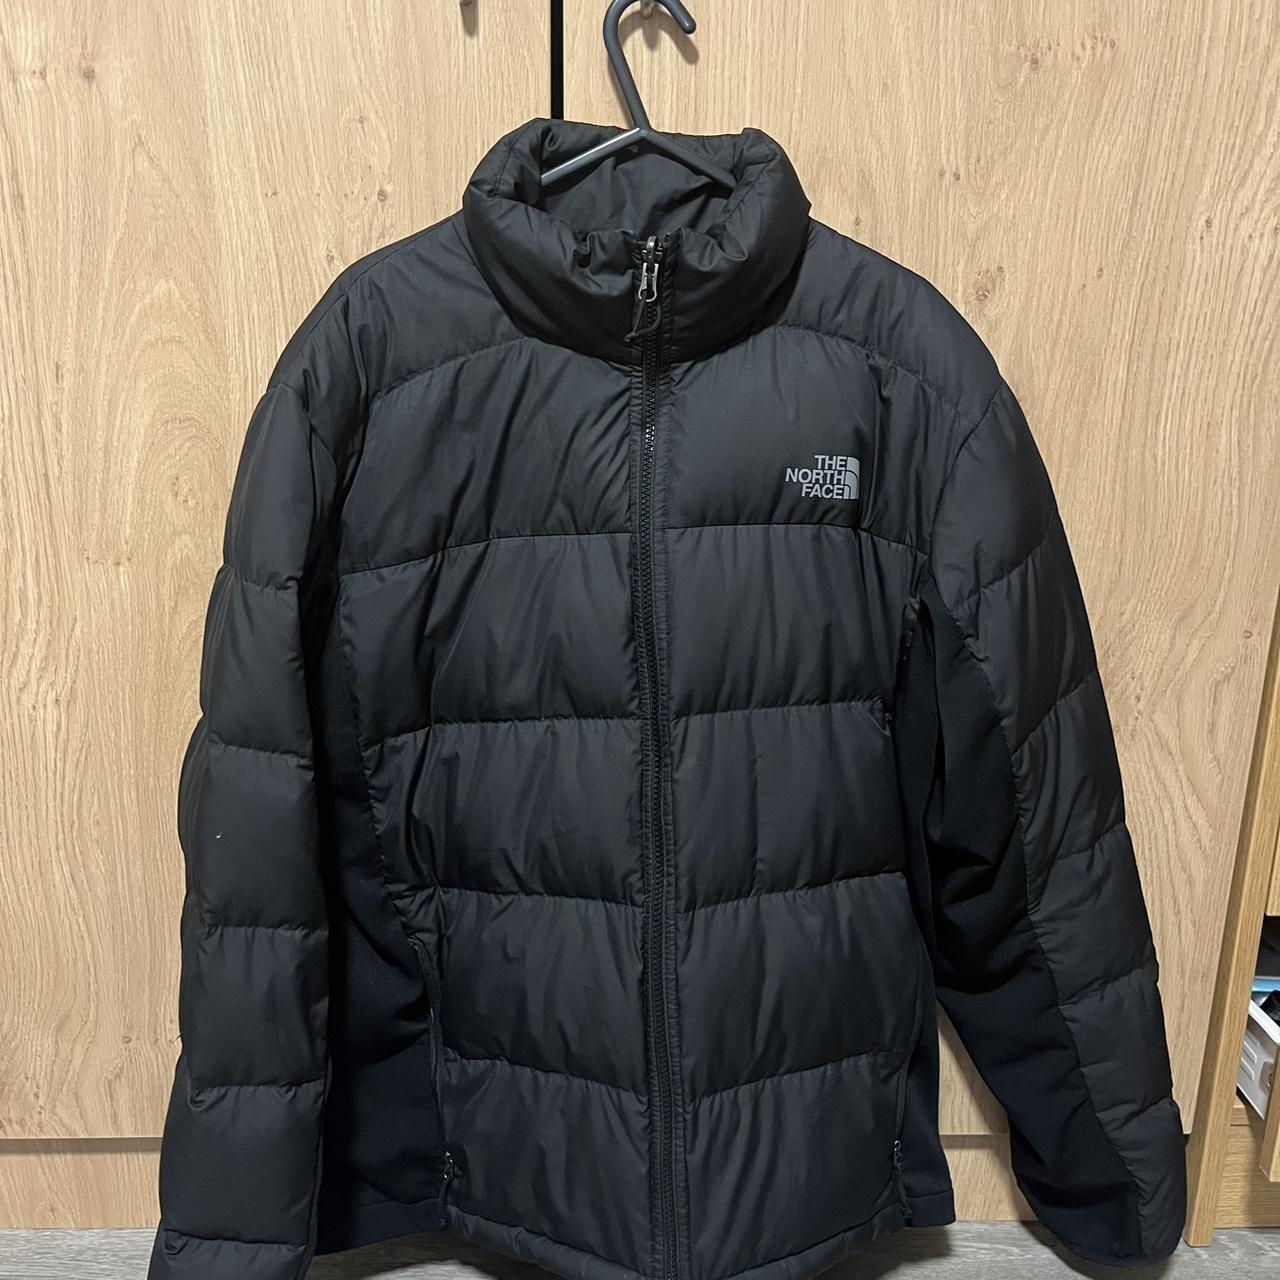 Classic North Face 550 Puffer Jacket - Stay Cozy in... - Depop